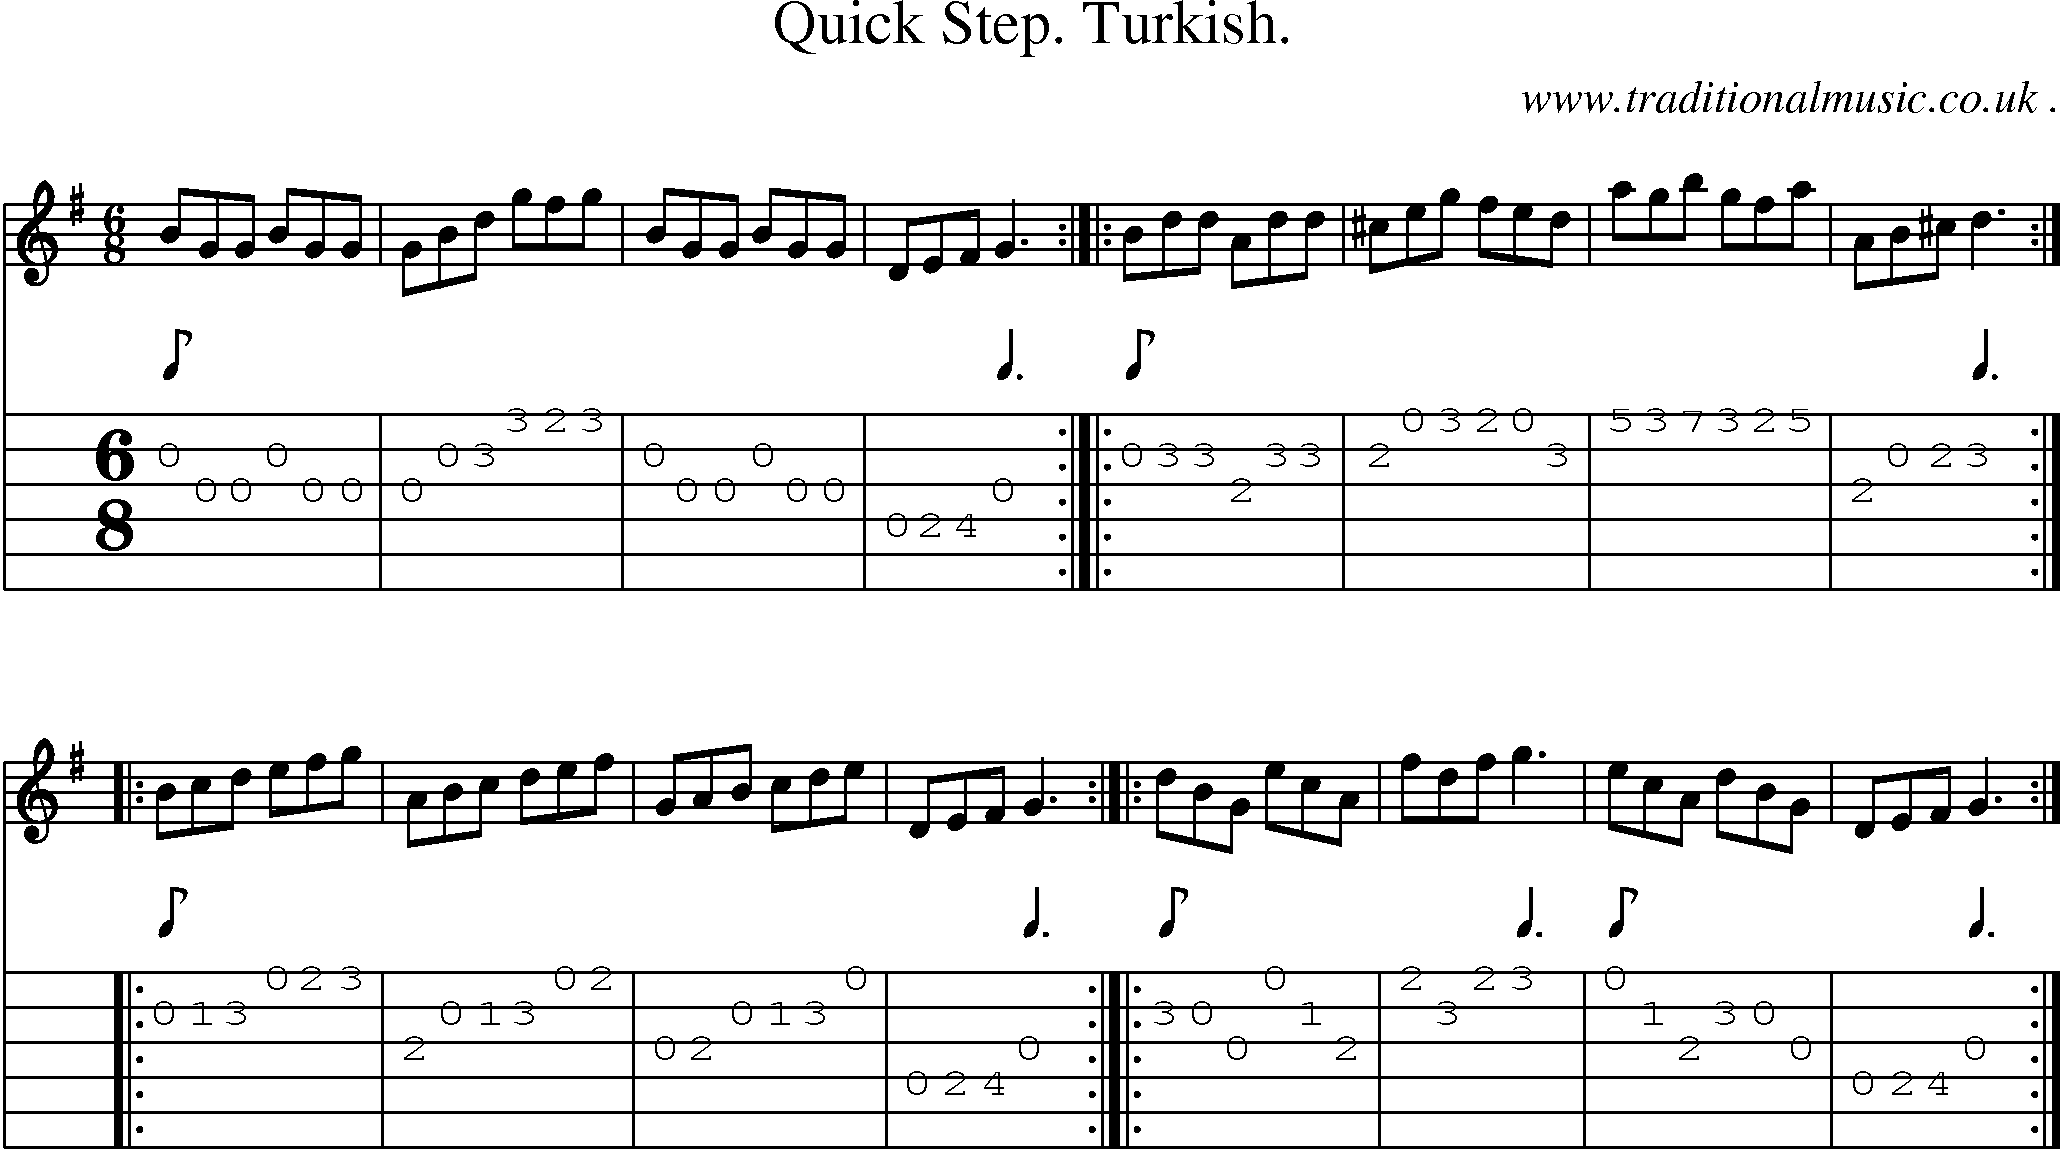 Sheet-music  score, Chords and Guitar Tabs for Quick Step Turkish